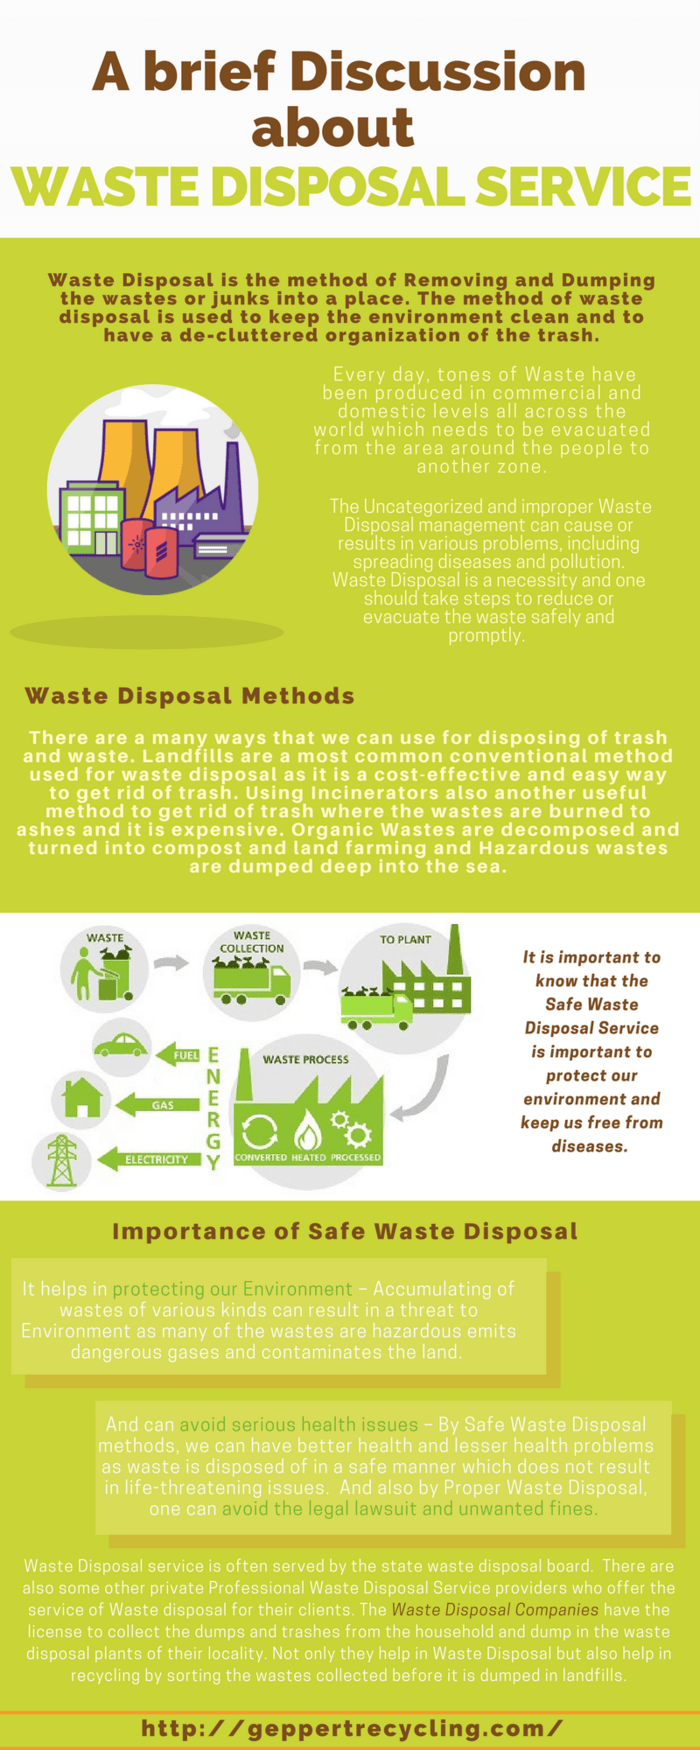 A Brief Discussion about Waste Disposal Service